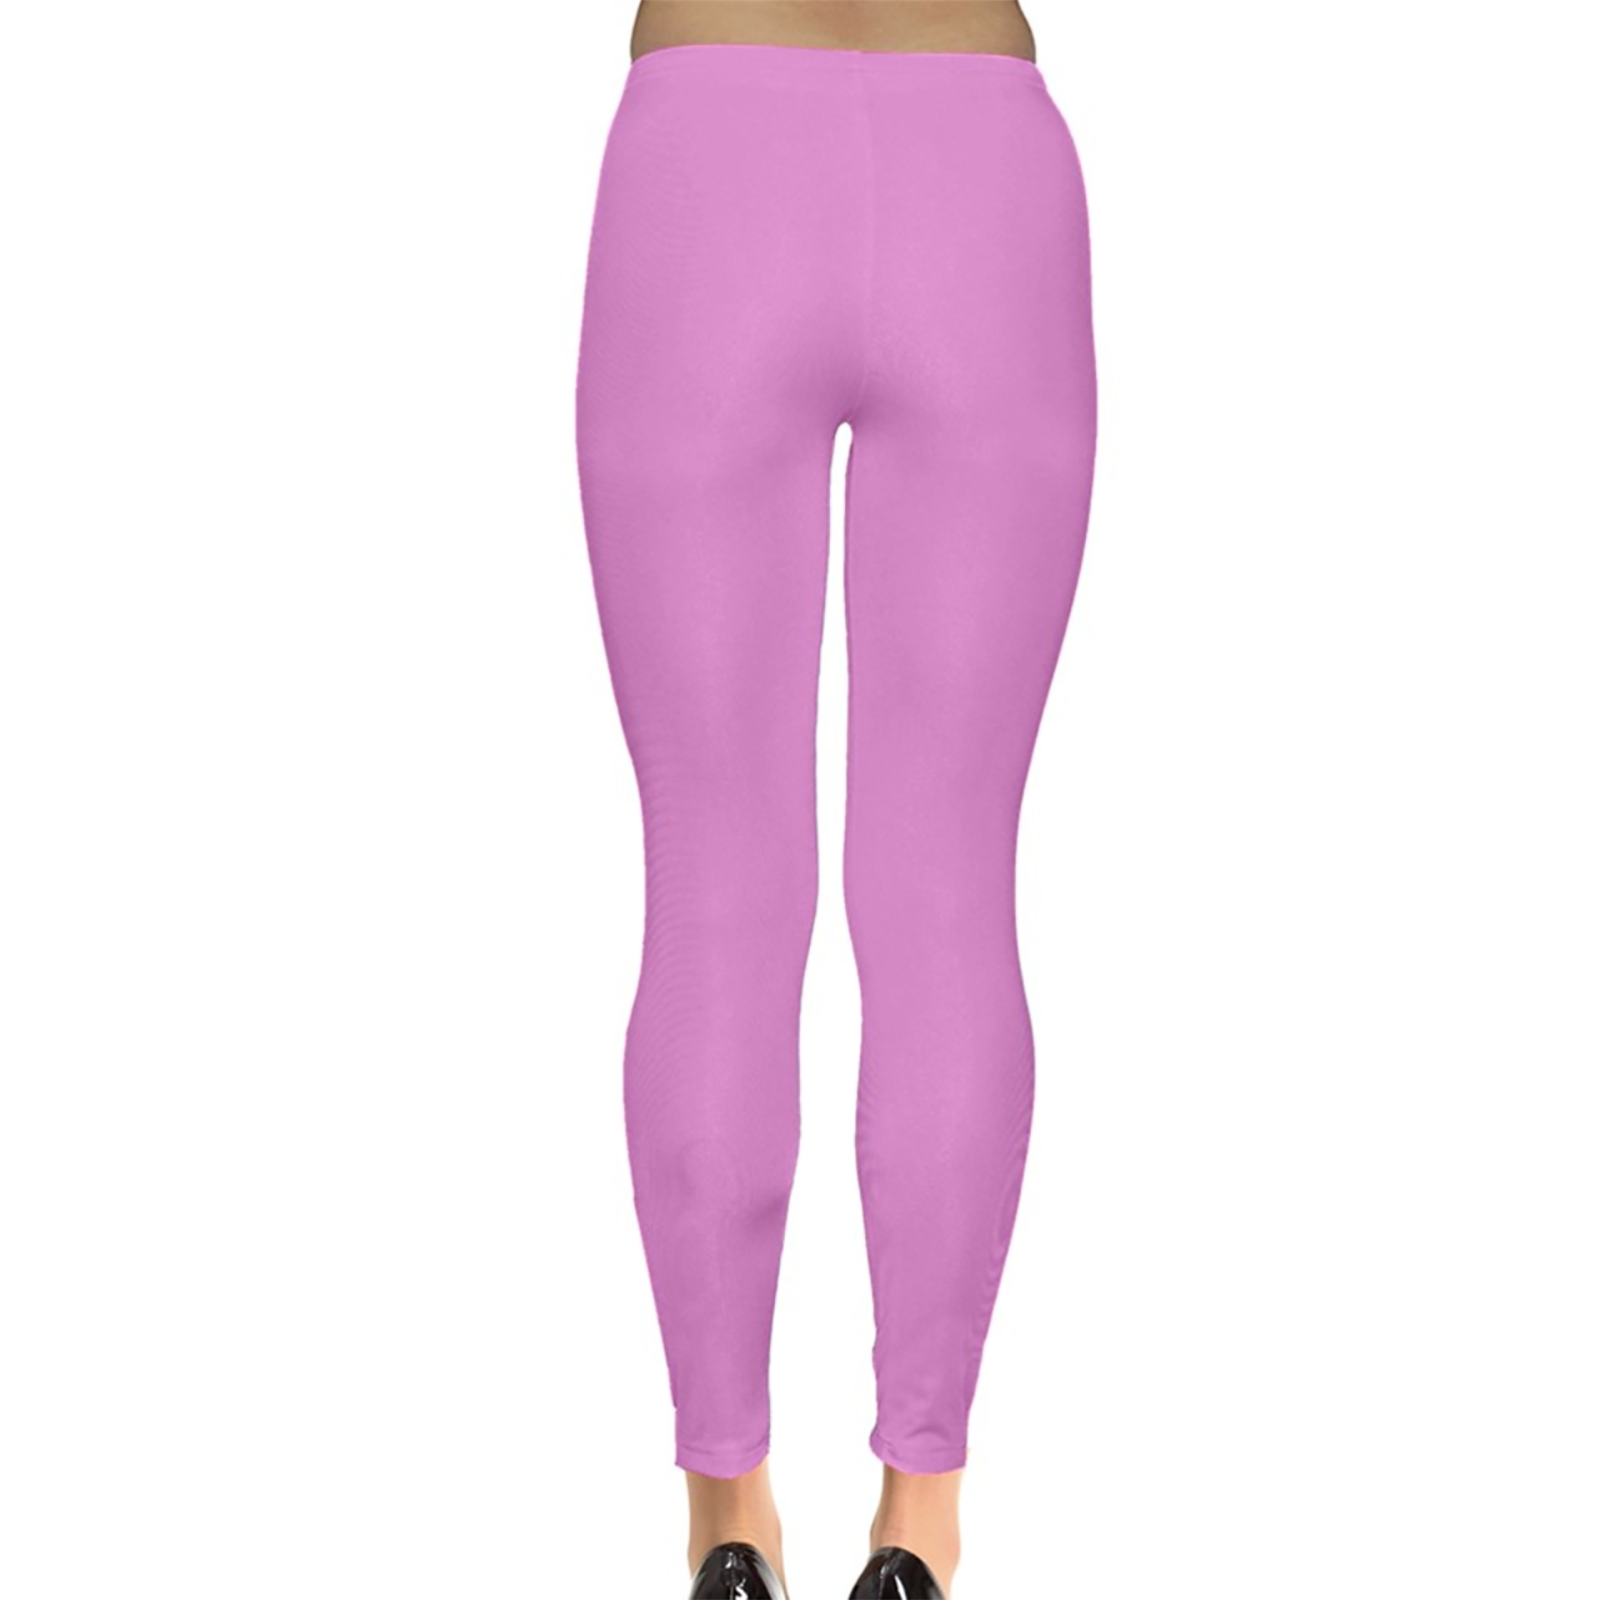 Candy Store Leggings (Pink)